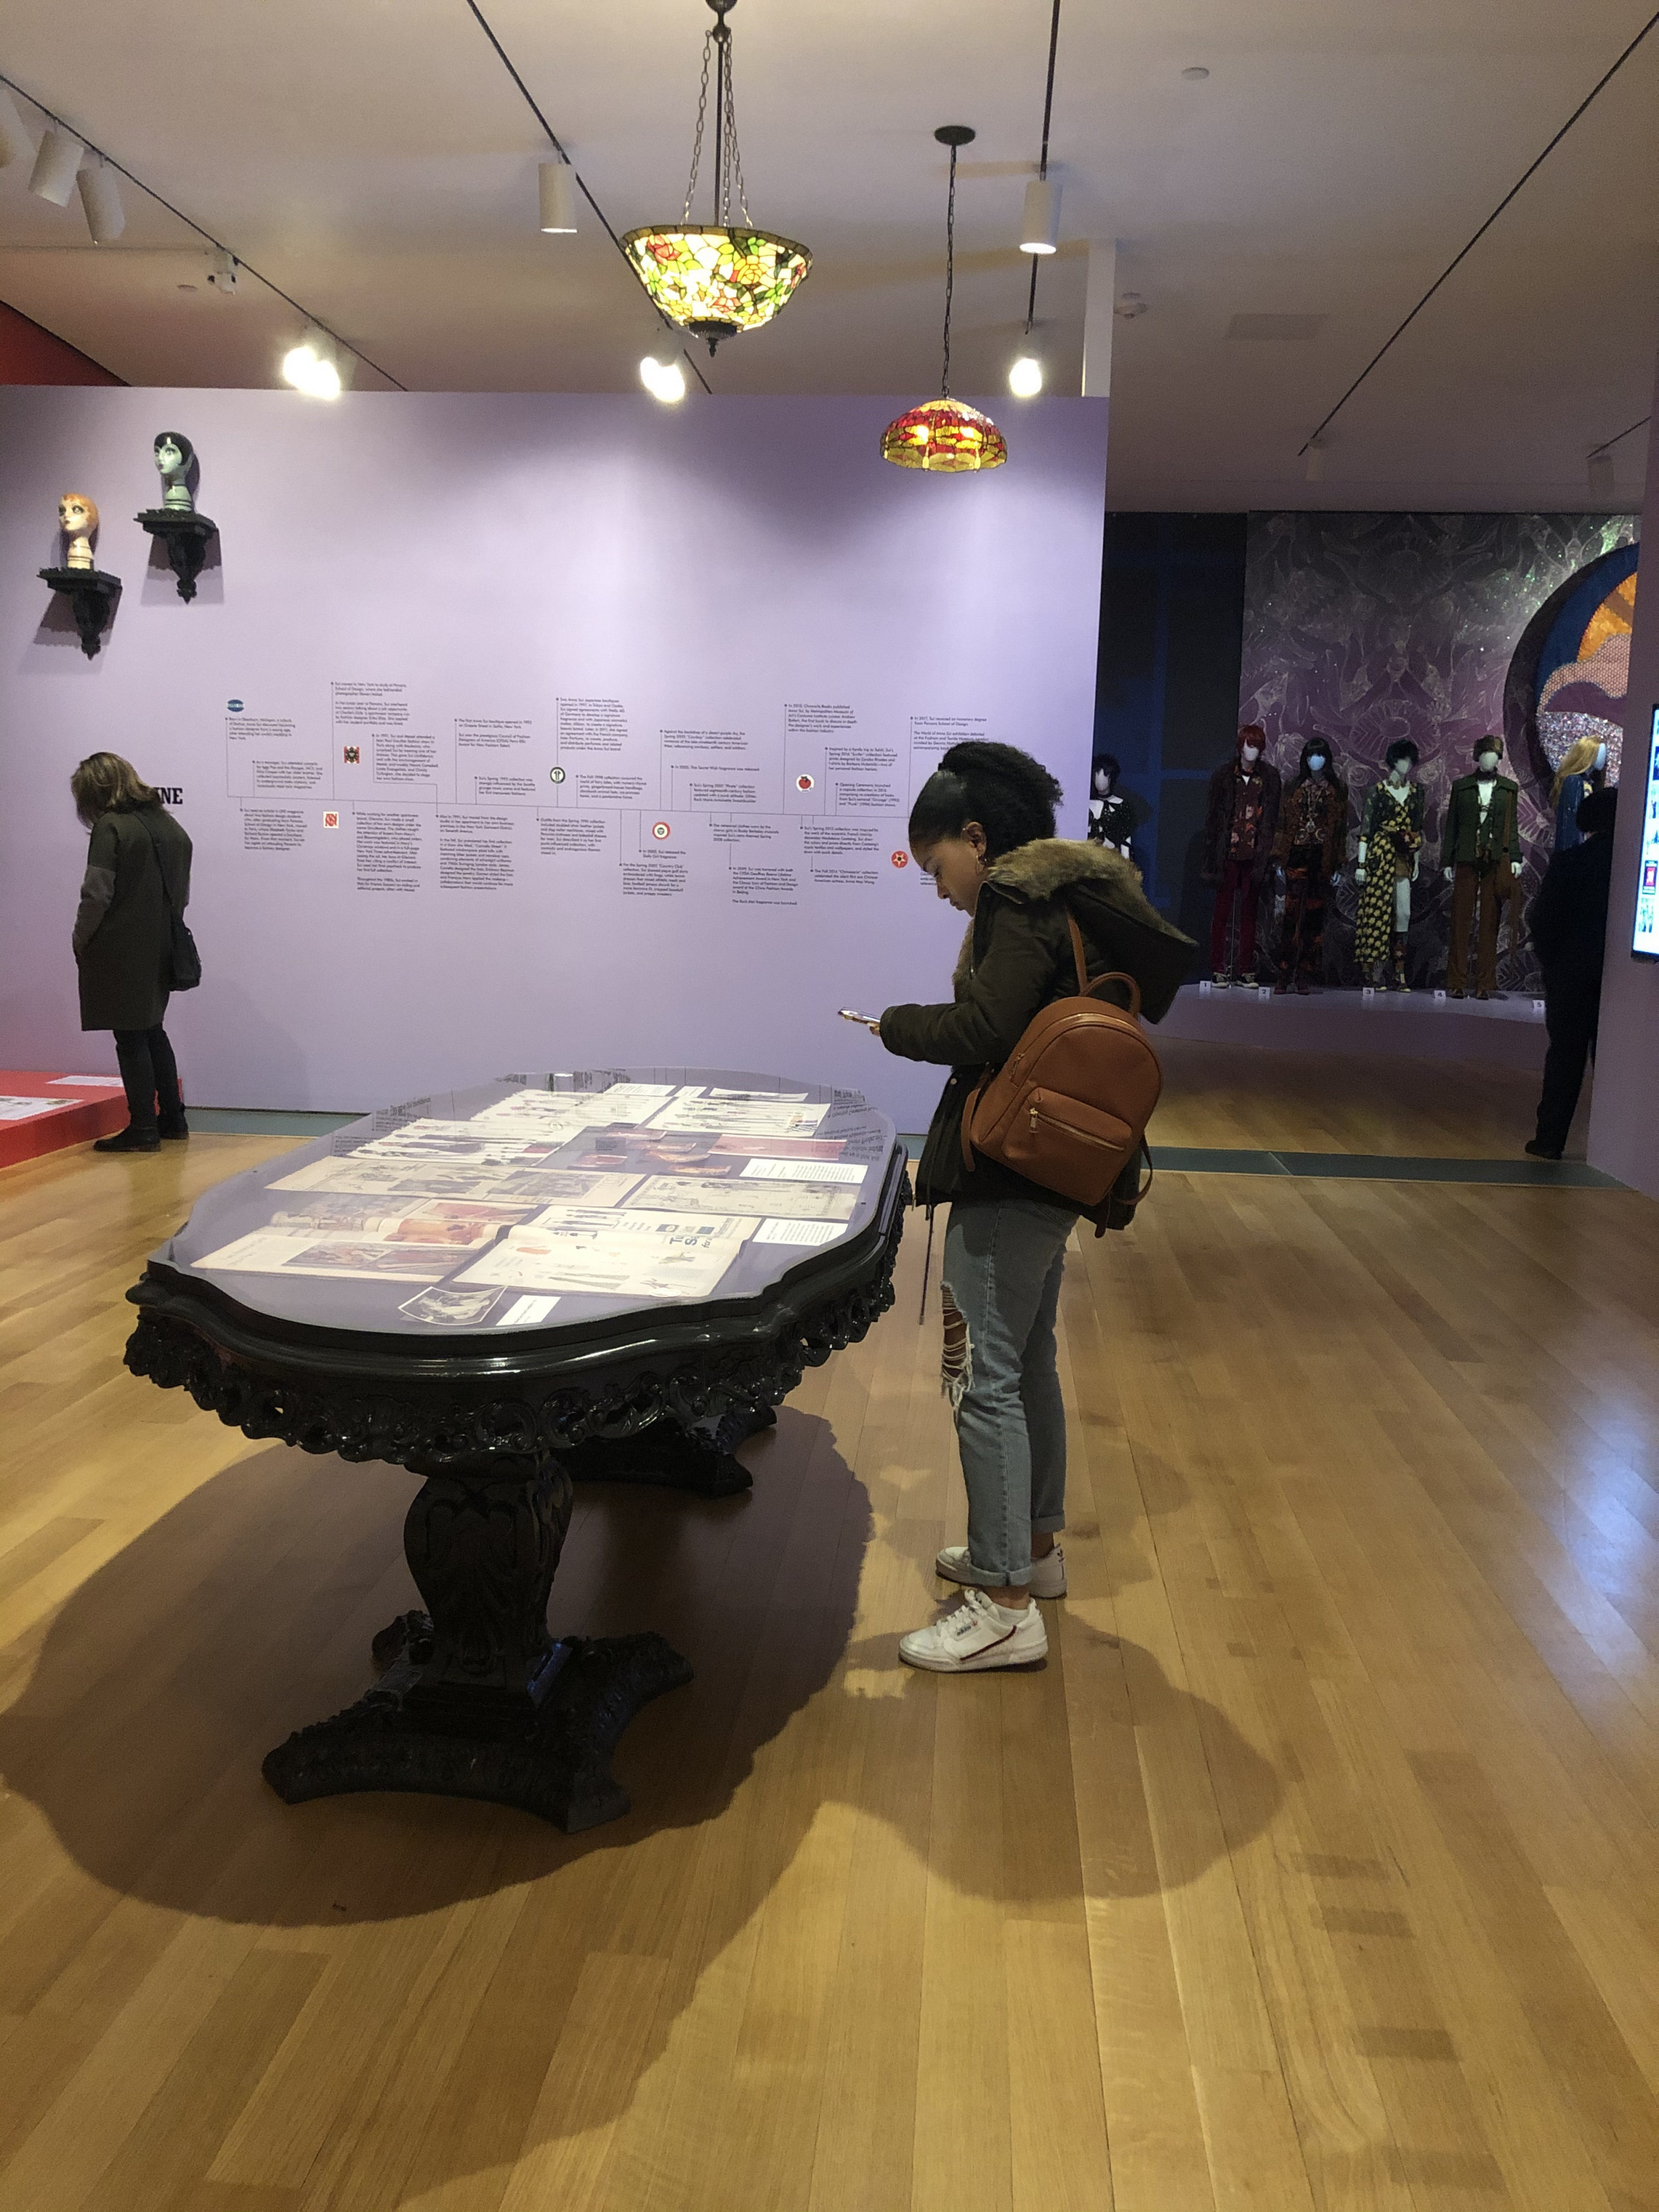 Students enrolled in the Business of Fashion visited the exhibition The World of Anna Sui at the Museum of Arts and Design (MAD)